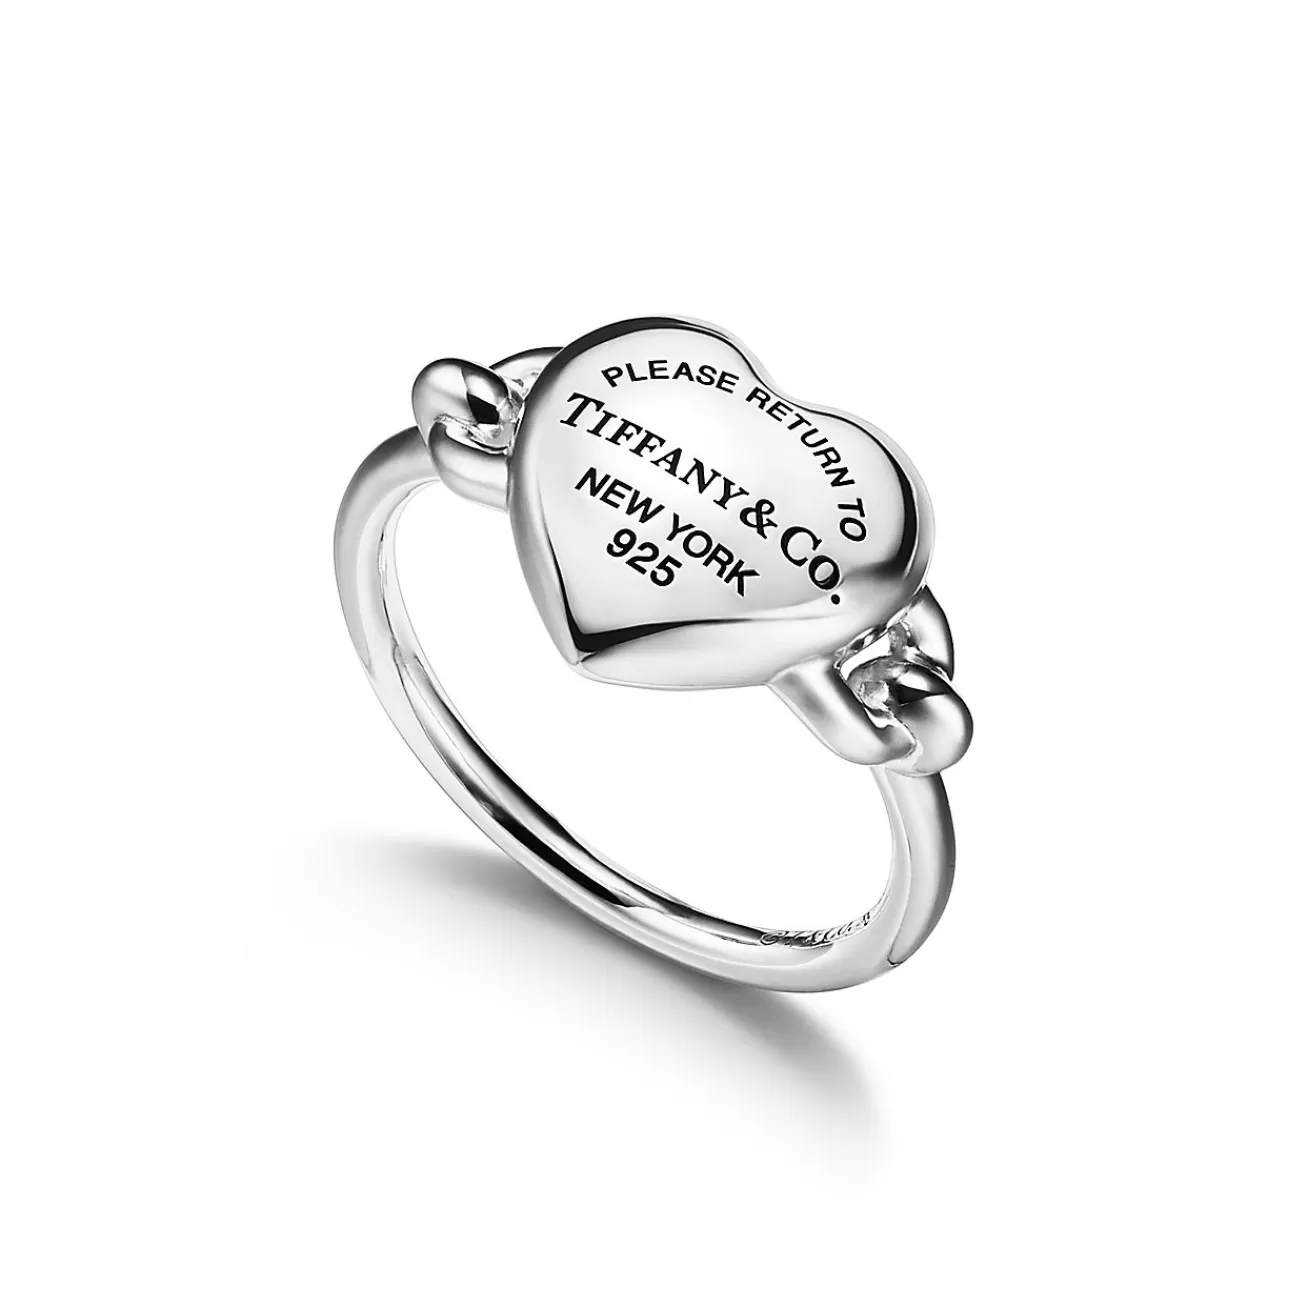 Tiffany & Co. Return to Tiffany® Full Heart Ring in Sterling Silver | ^ Rings | Gifts for Her